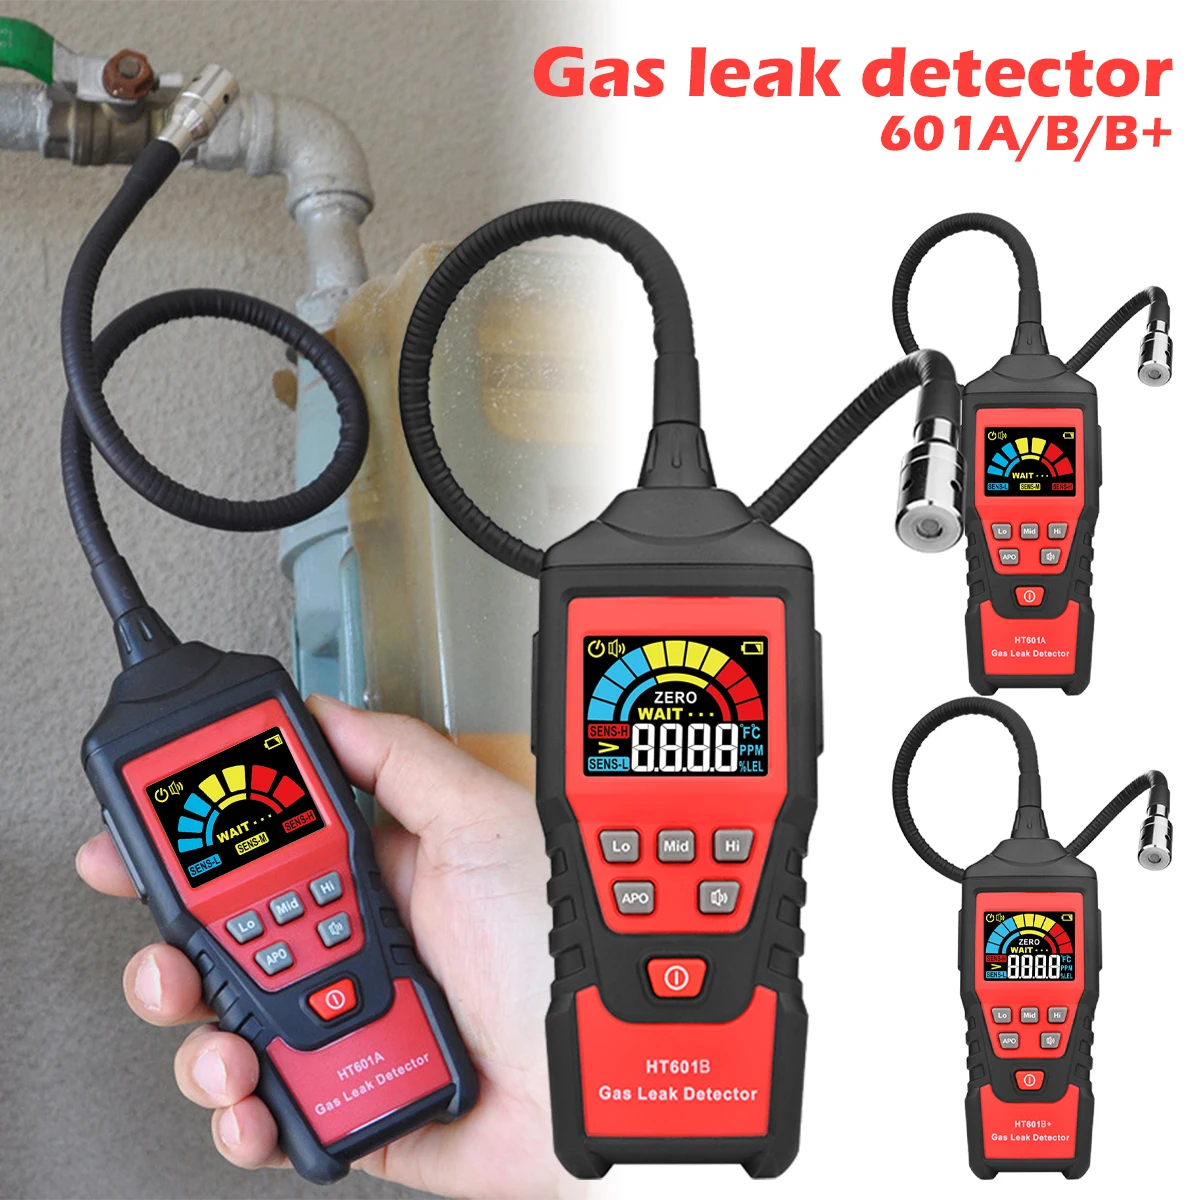 

HABOTEST Propane CO Hexane Methane Gas Leak Detector Combustible Flammable Natural Gas PPM Meter Analyzer 9999 PPM 20% LEL